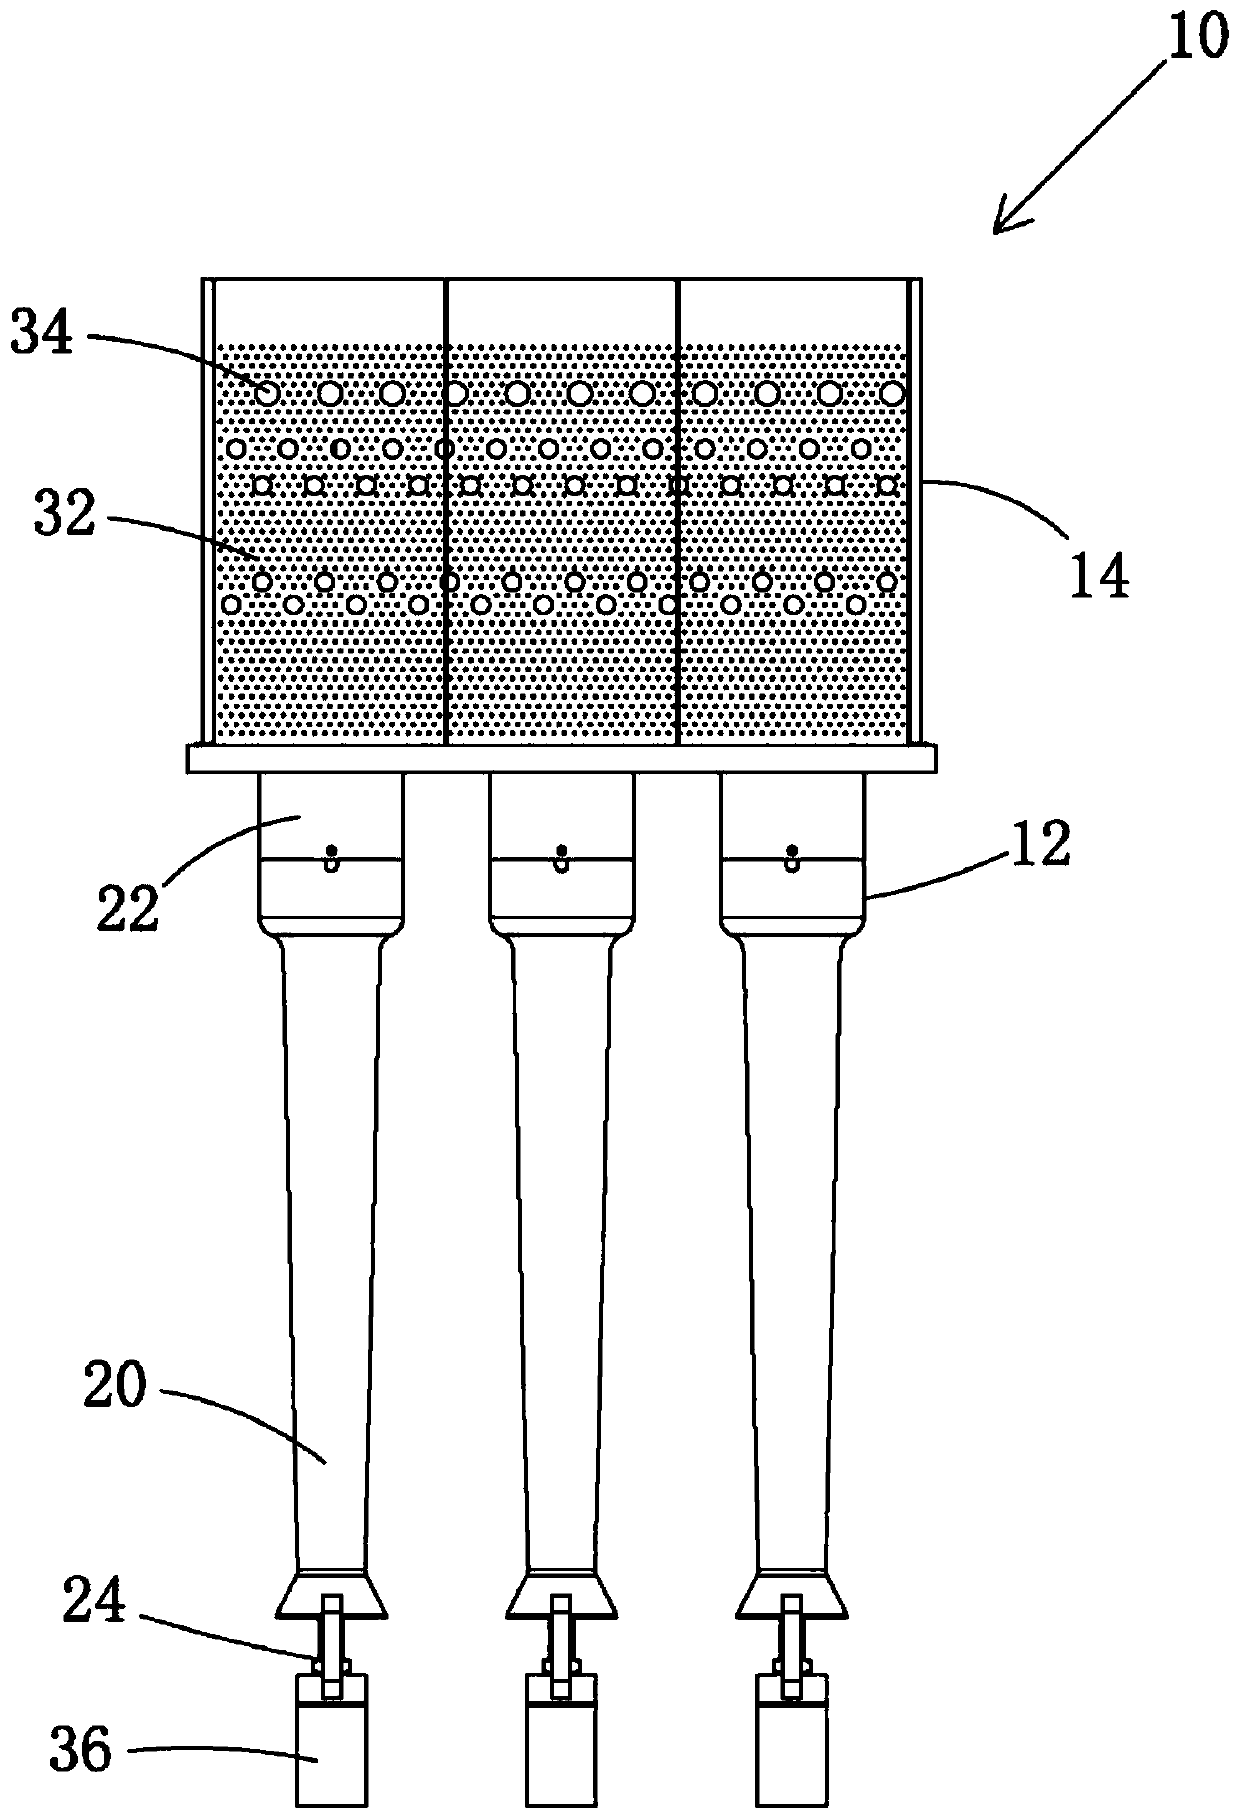 Co-fired combustor for increased flare handling capacity